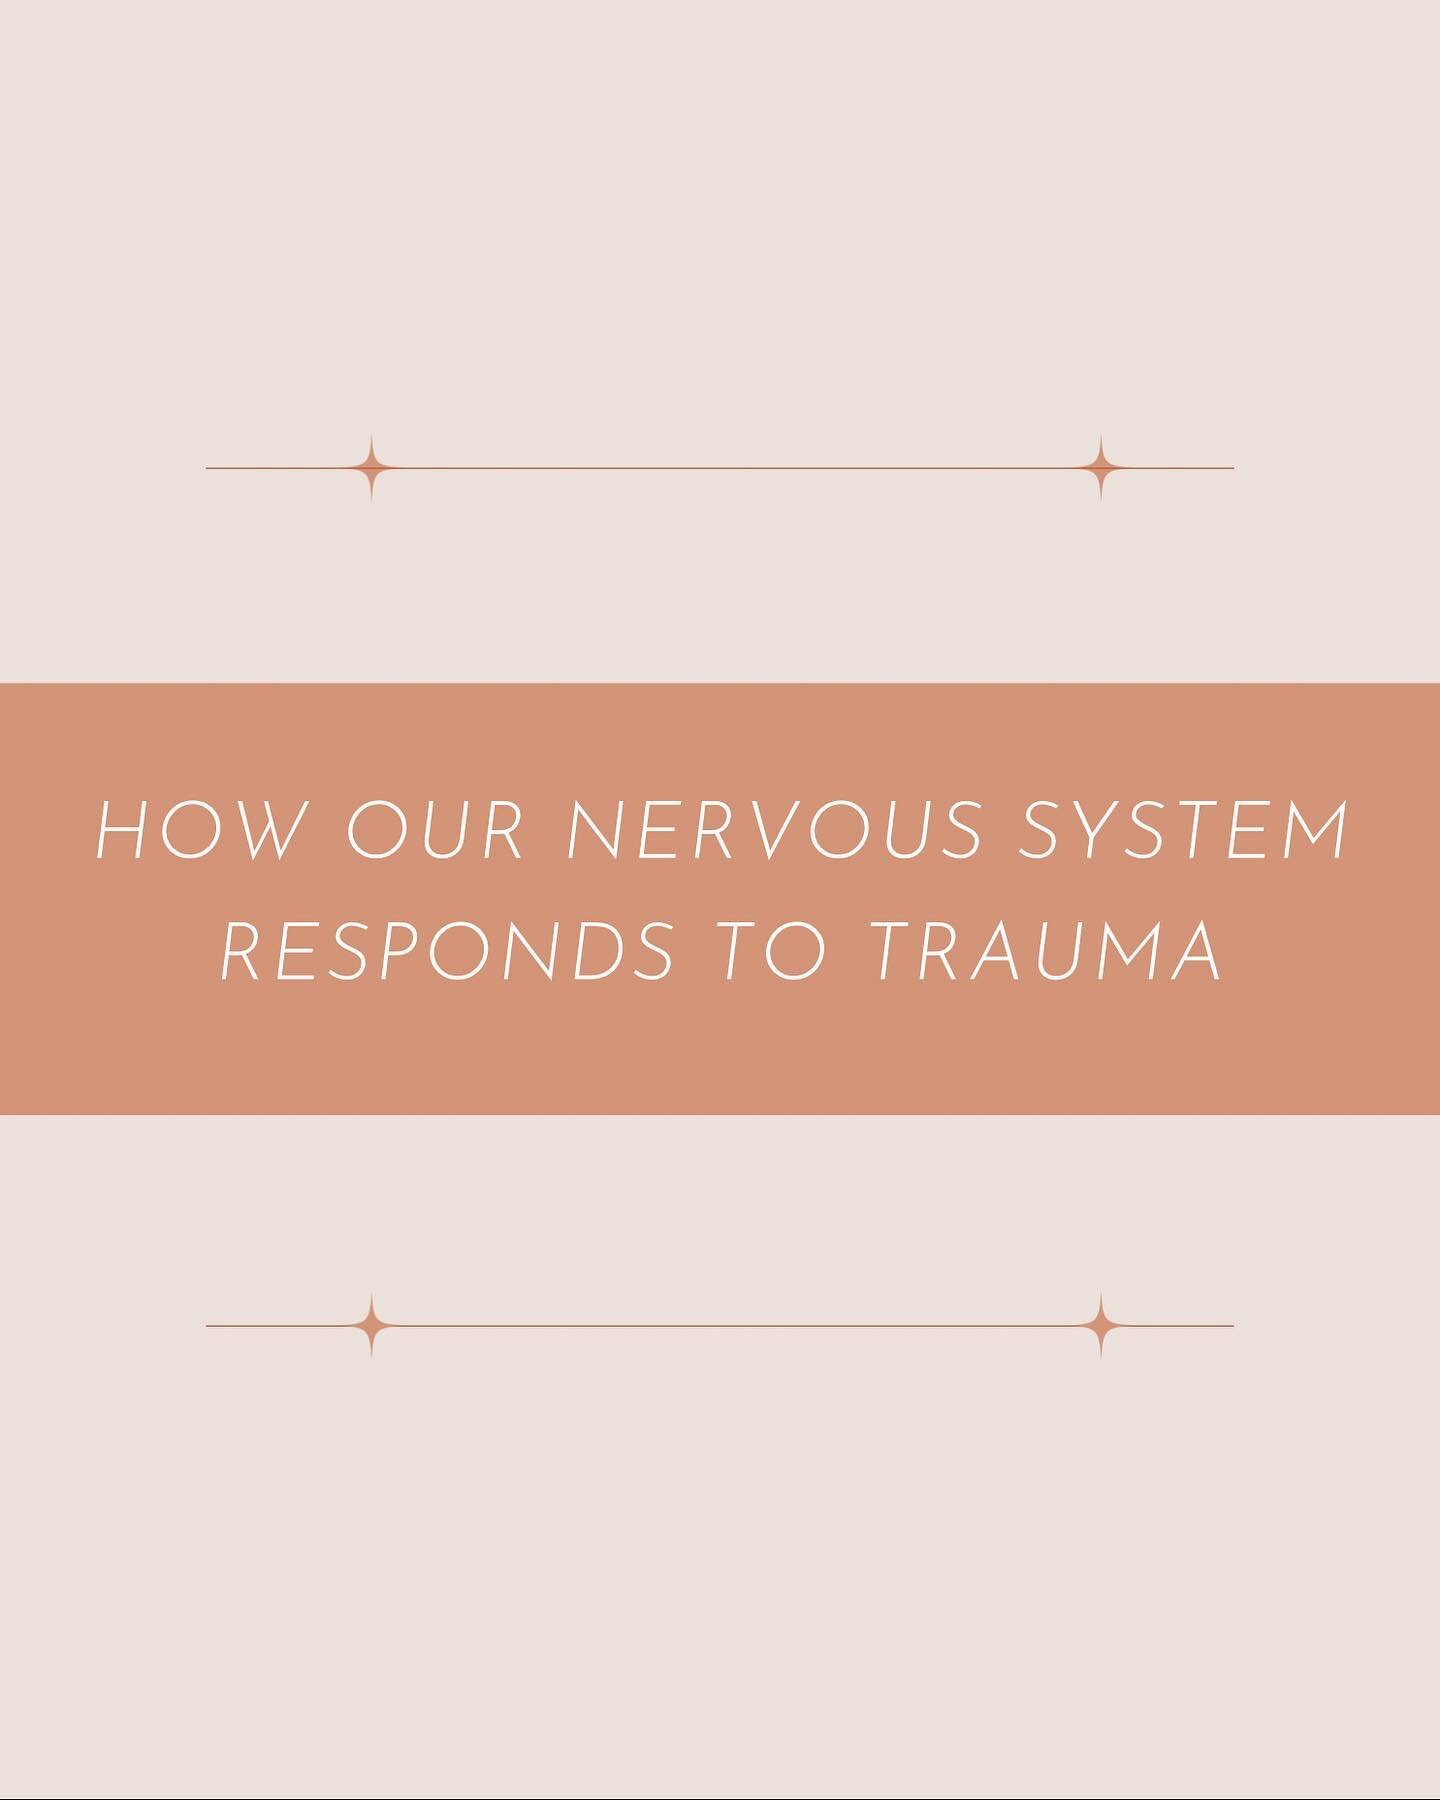 You probably have heard of the phrase &ldquo;fight or flight&rdquo; - the commonly known auto-pilot reactions to danger or threat. But not everyone is aware that there are two other trauma responses our nervous system can automatically engage in: fre